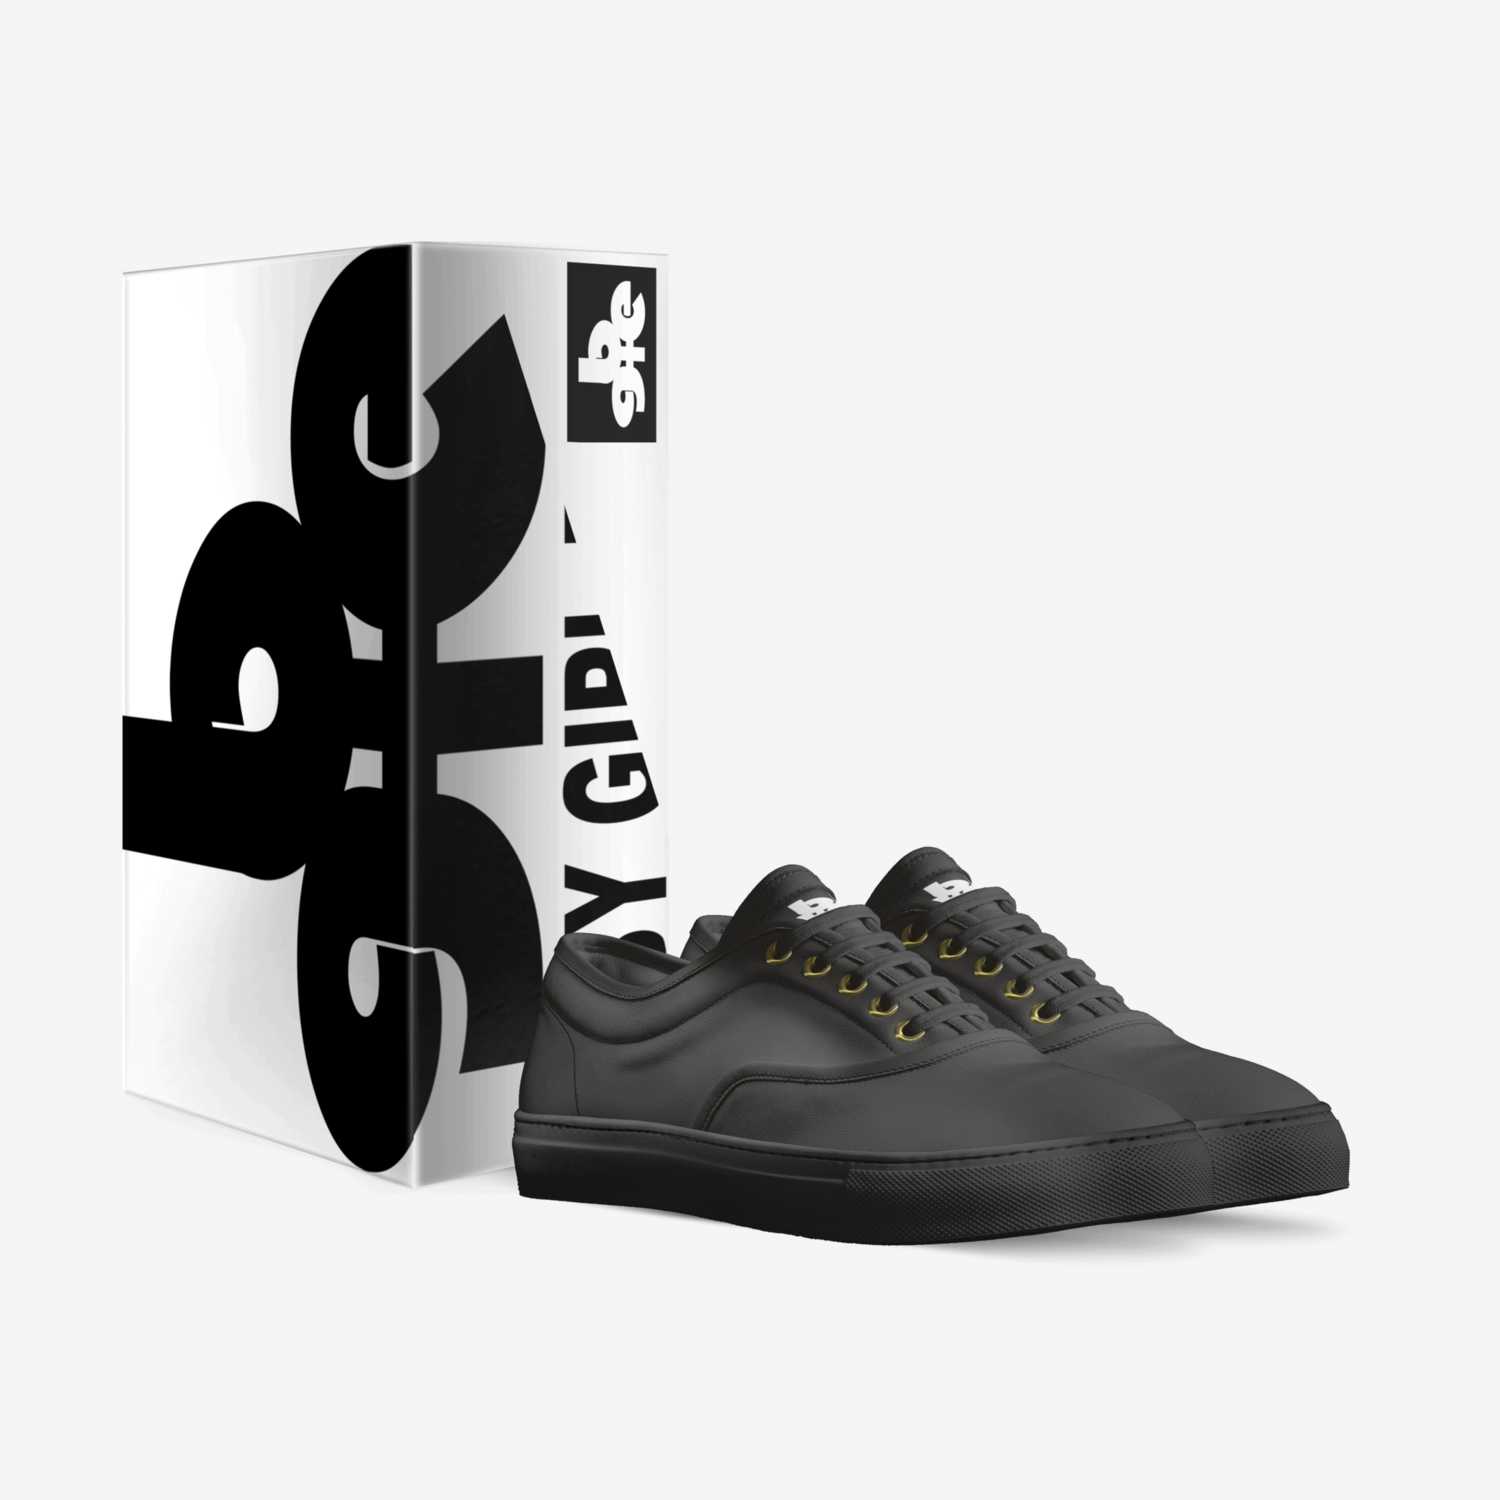 AllBlack Storia custom made in Italy shoes by Baby-girl Elite | Box view